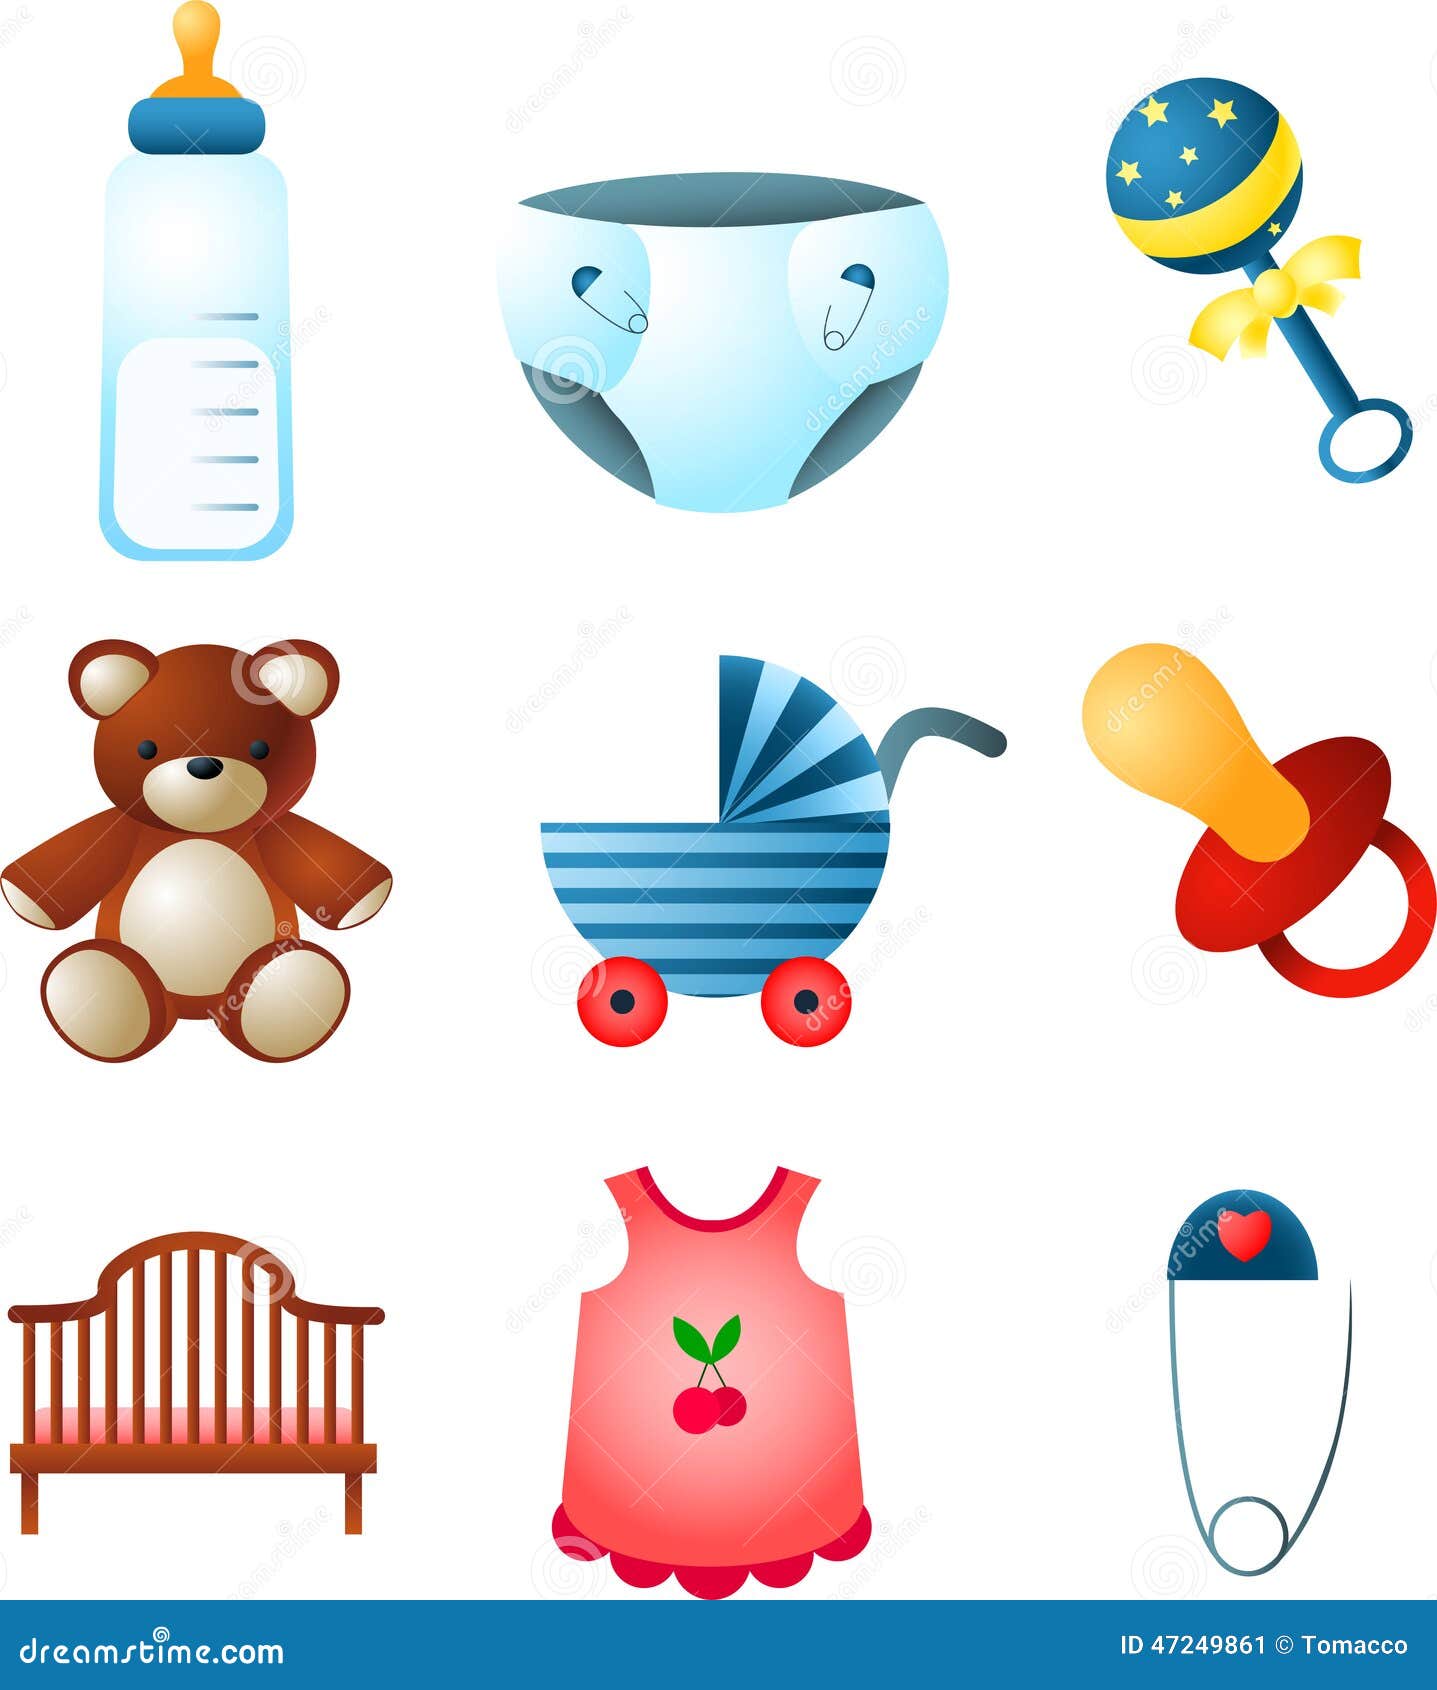 https://thumbs.dreamstime.com/z/baby-elements-collection-vector-illustration-cartoon-47249861.jpg